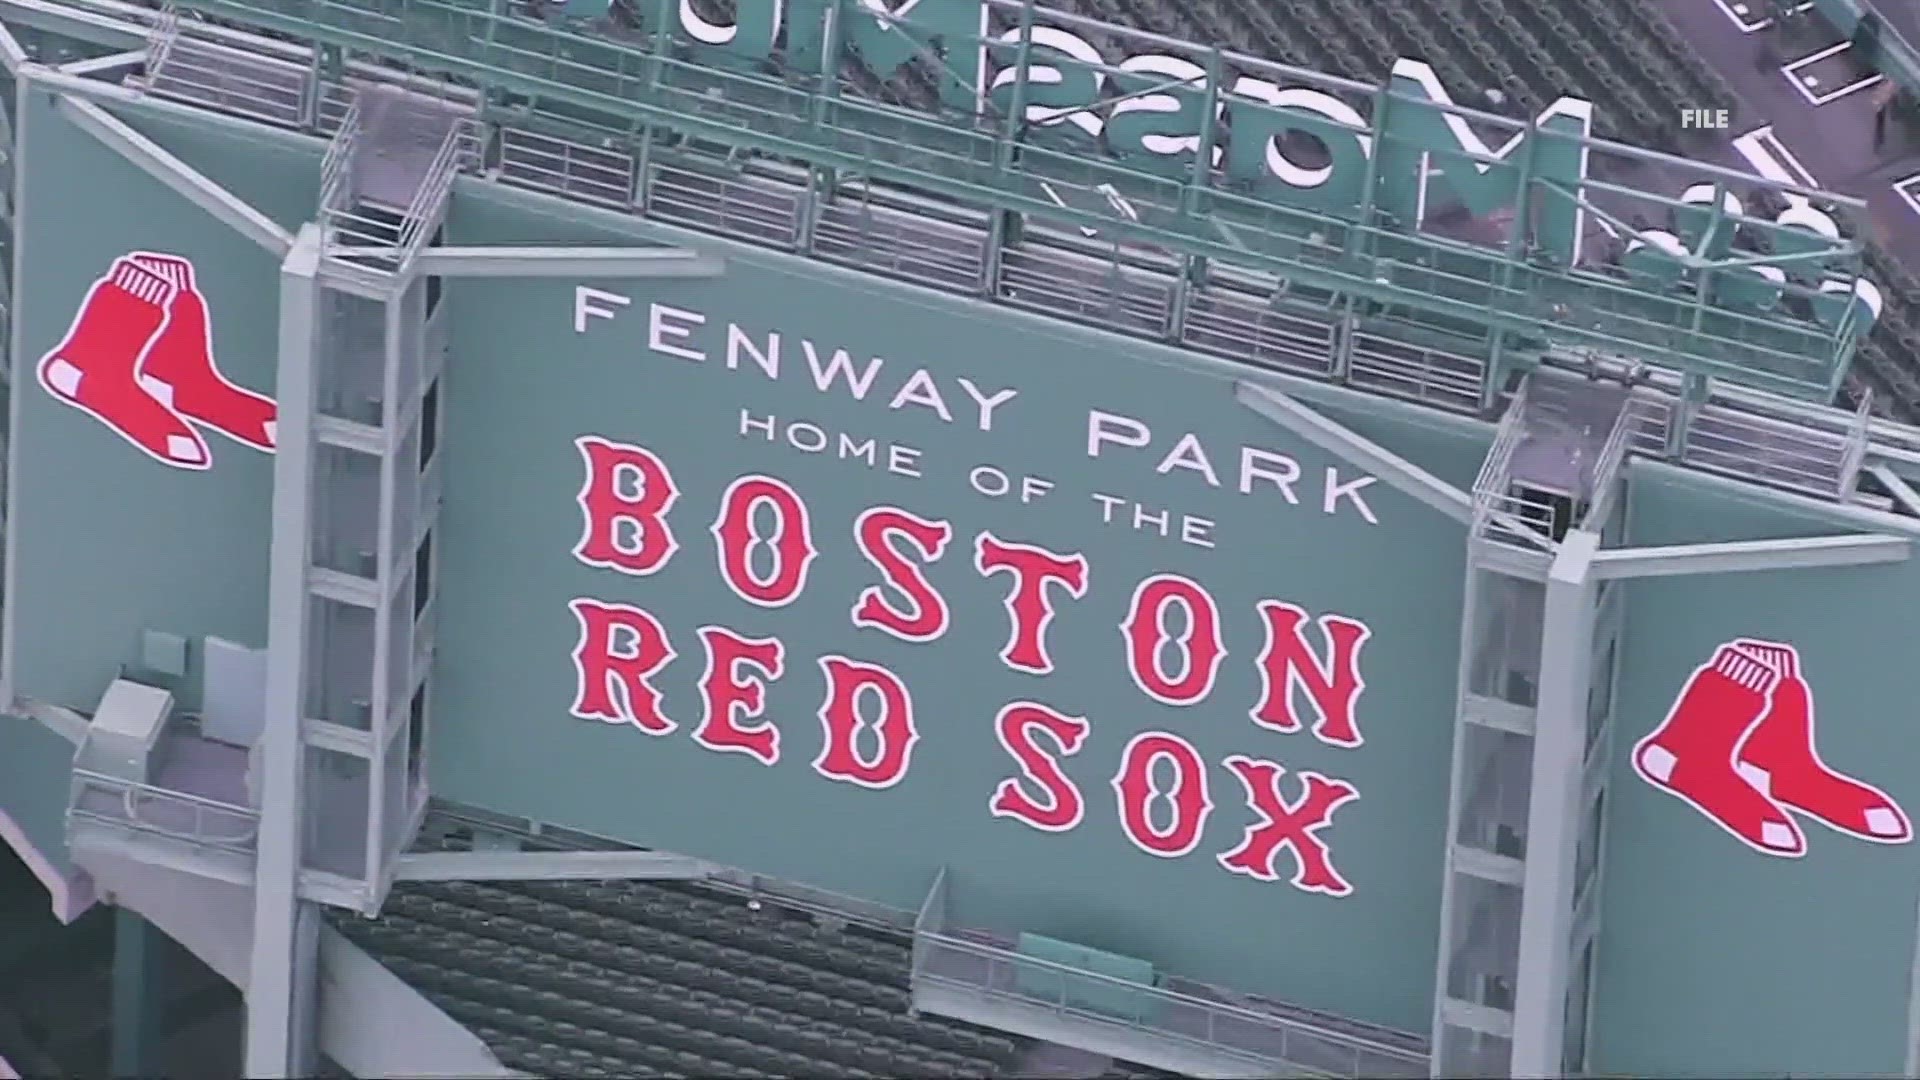 Netflix intends to air a documentary this year focusing on the 2004 Red Sox, who broke the so-called Curse of the Bambino and won the team's first title since 1918.